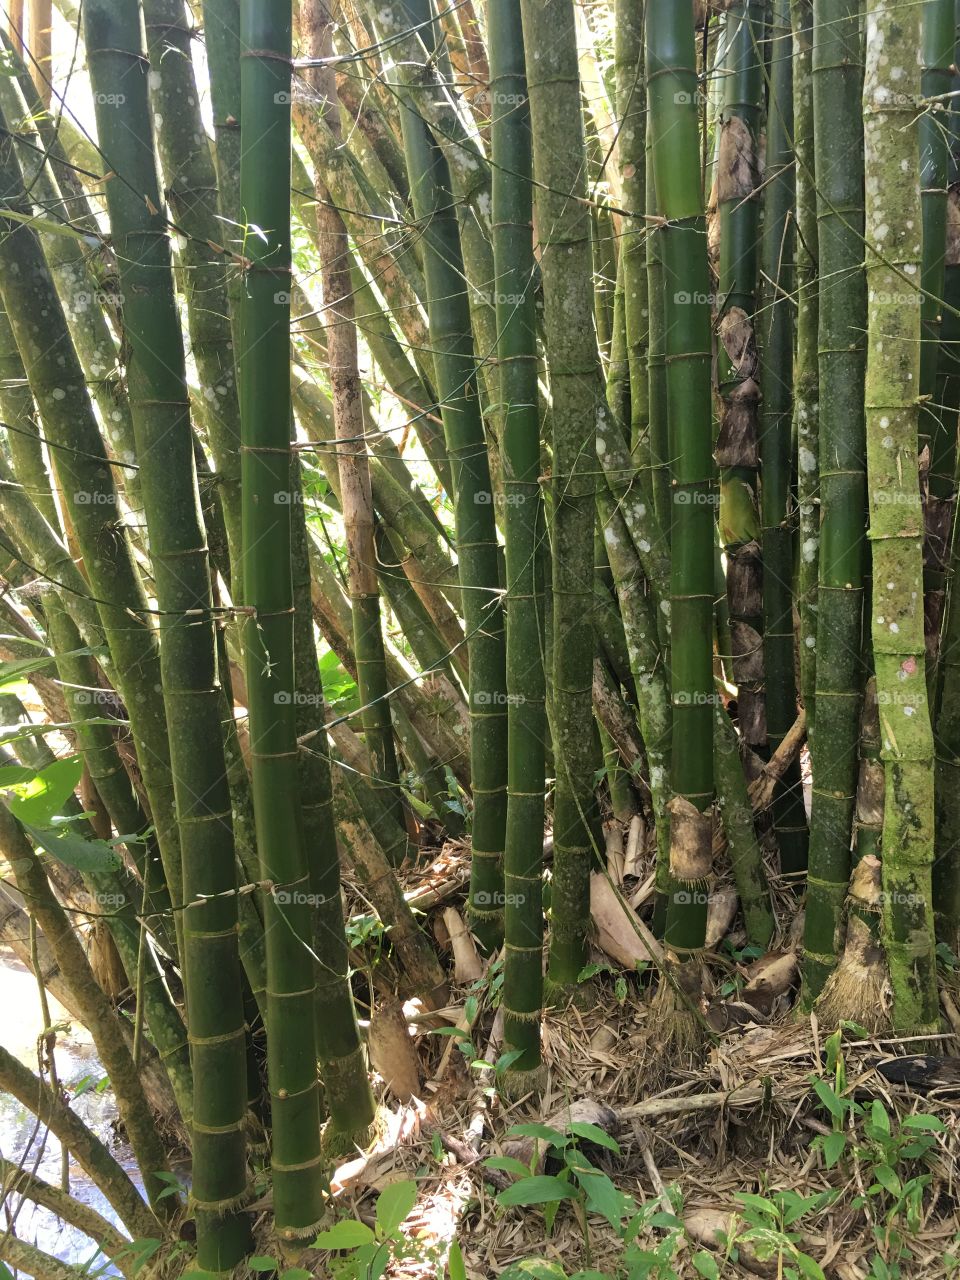 Green Bamboo growing in the forest